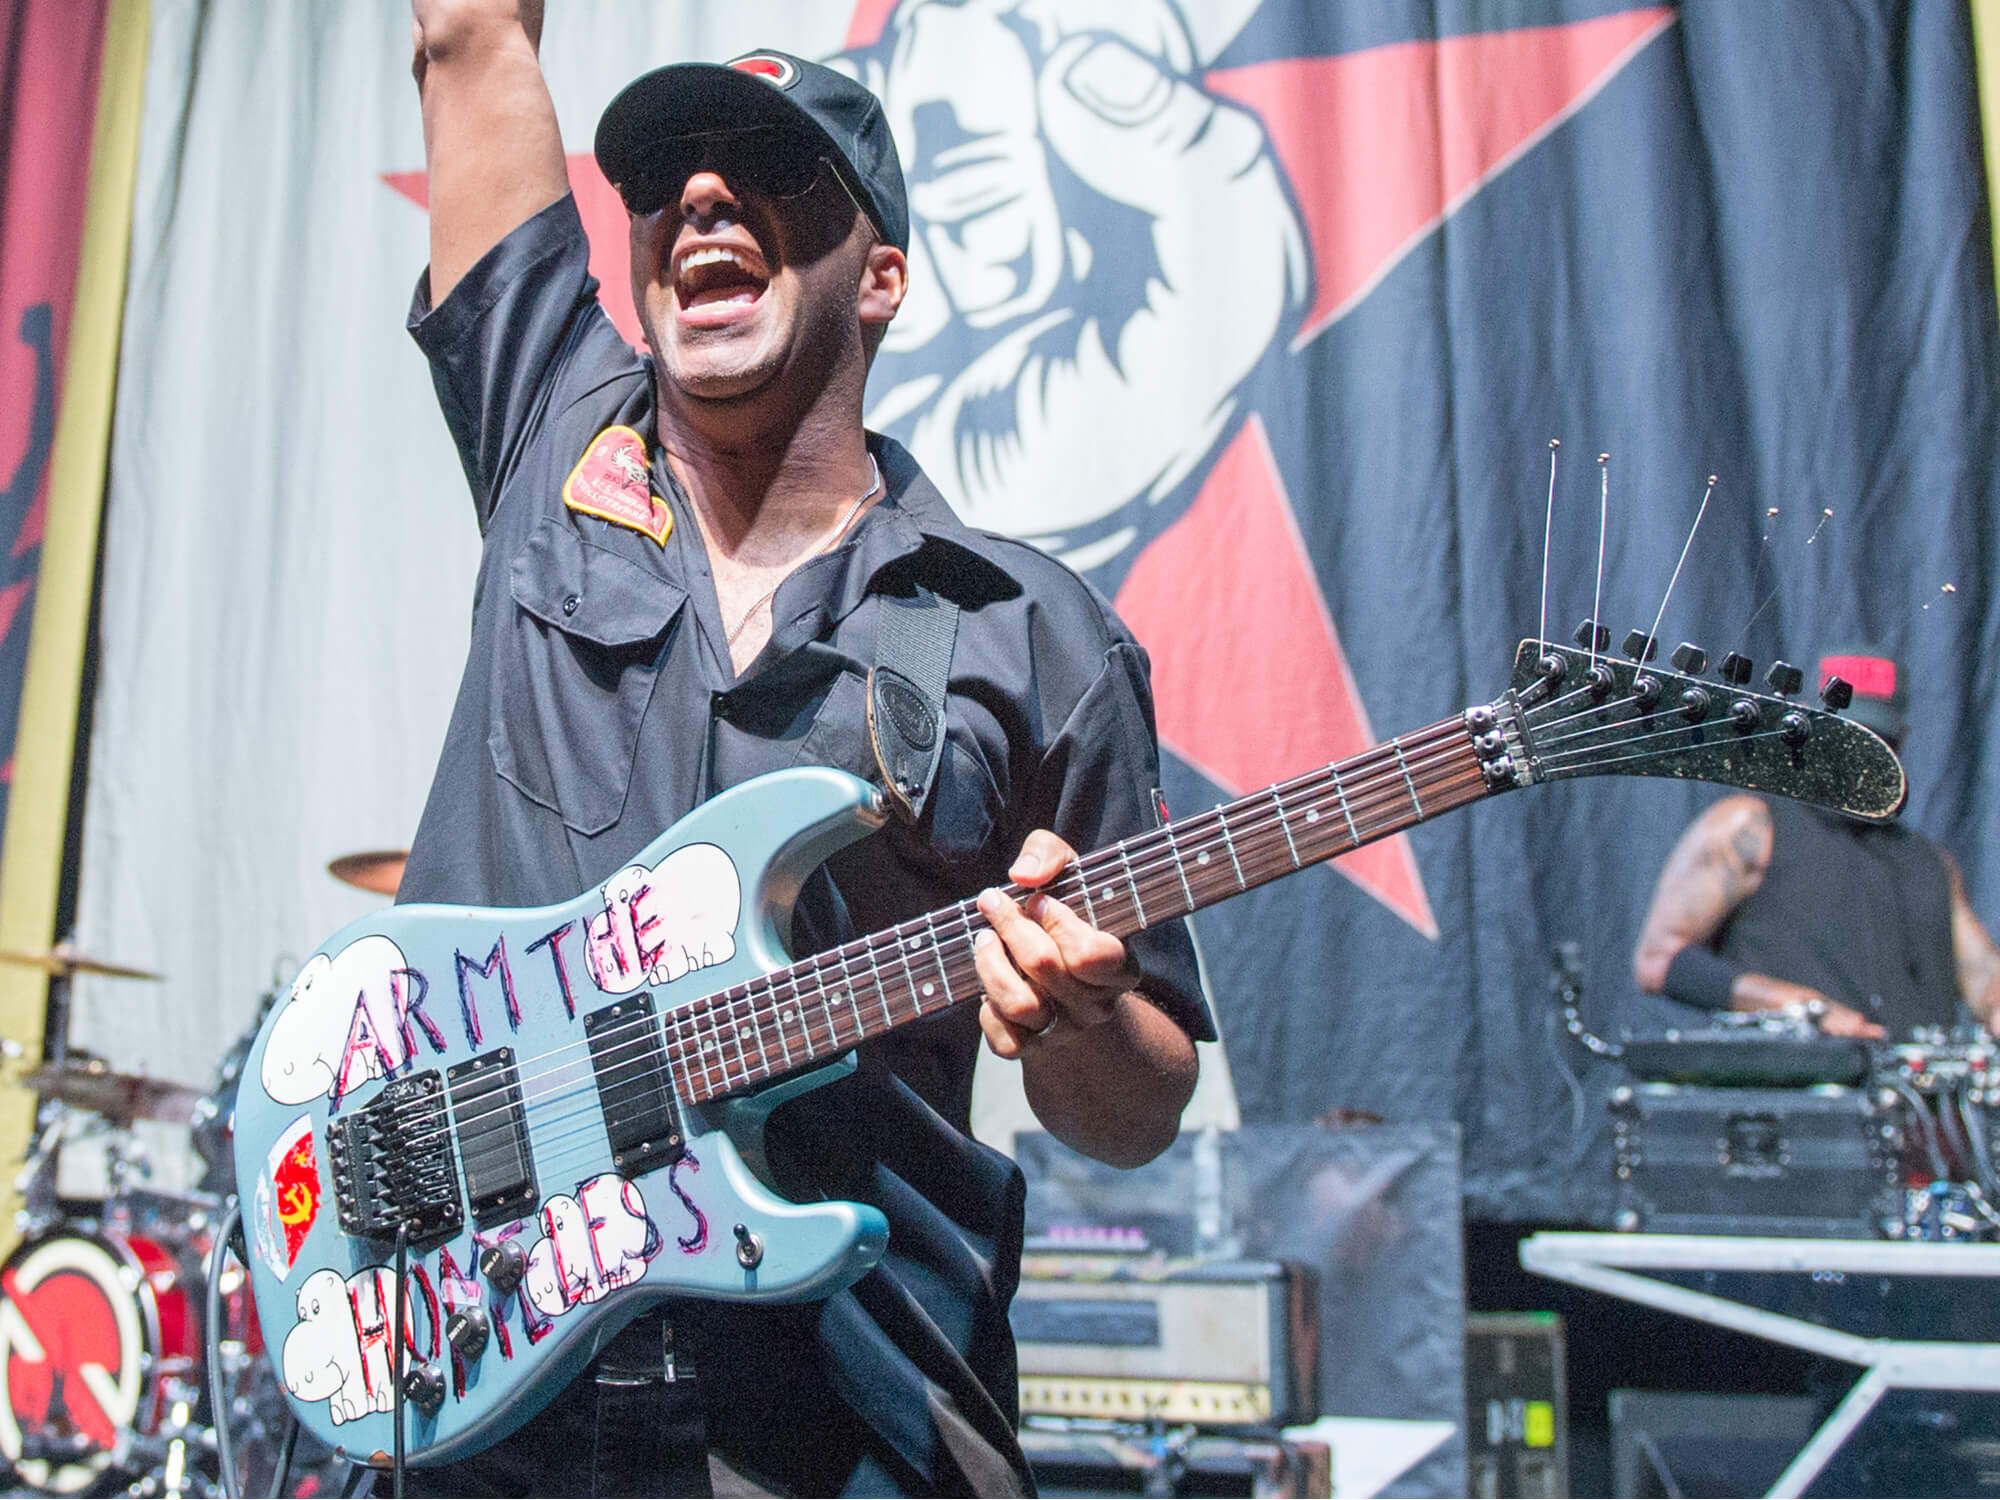 Tom Morello of Rage Against The Machine performs as part of Prophets Of Rage on stage at O2 Shepherd's Bush Empire on August 12, 2019 in London, England